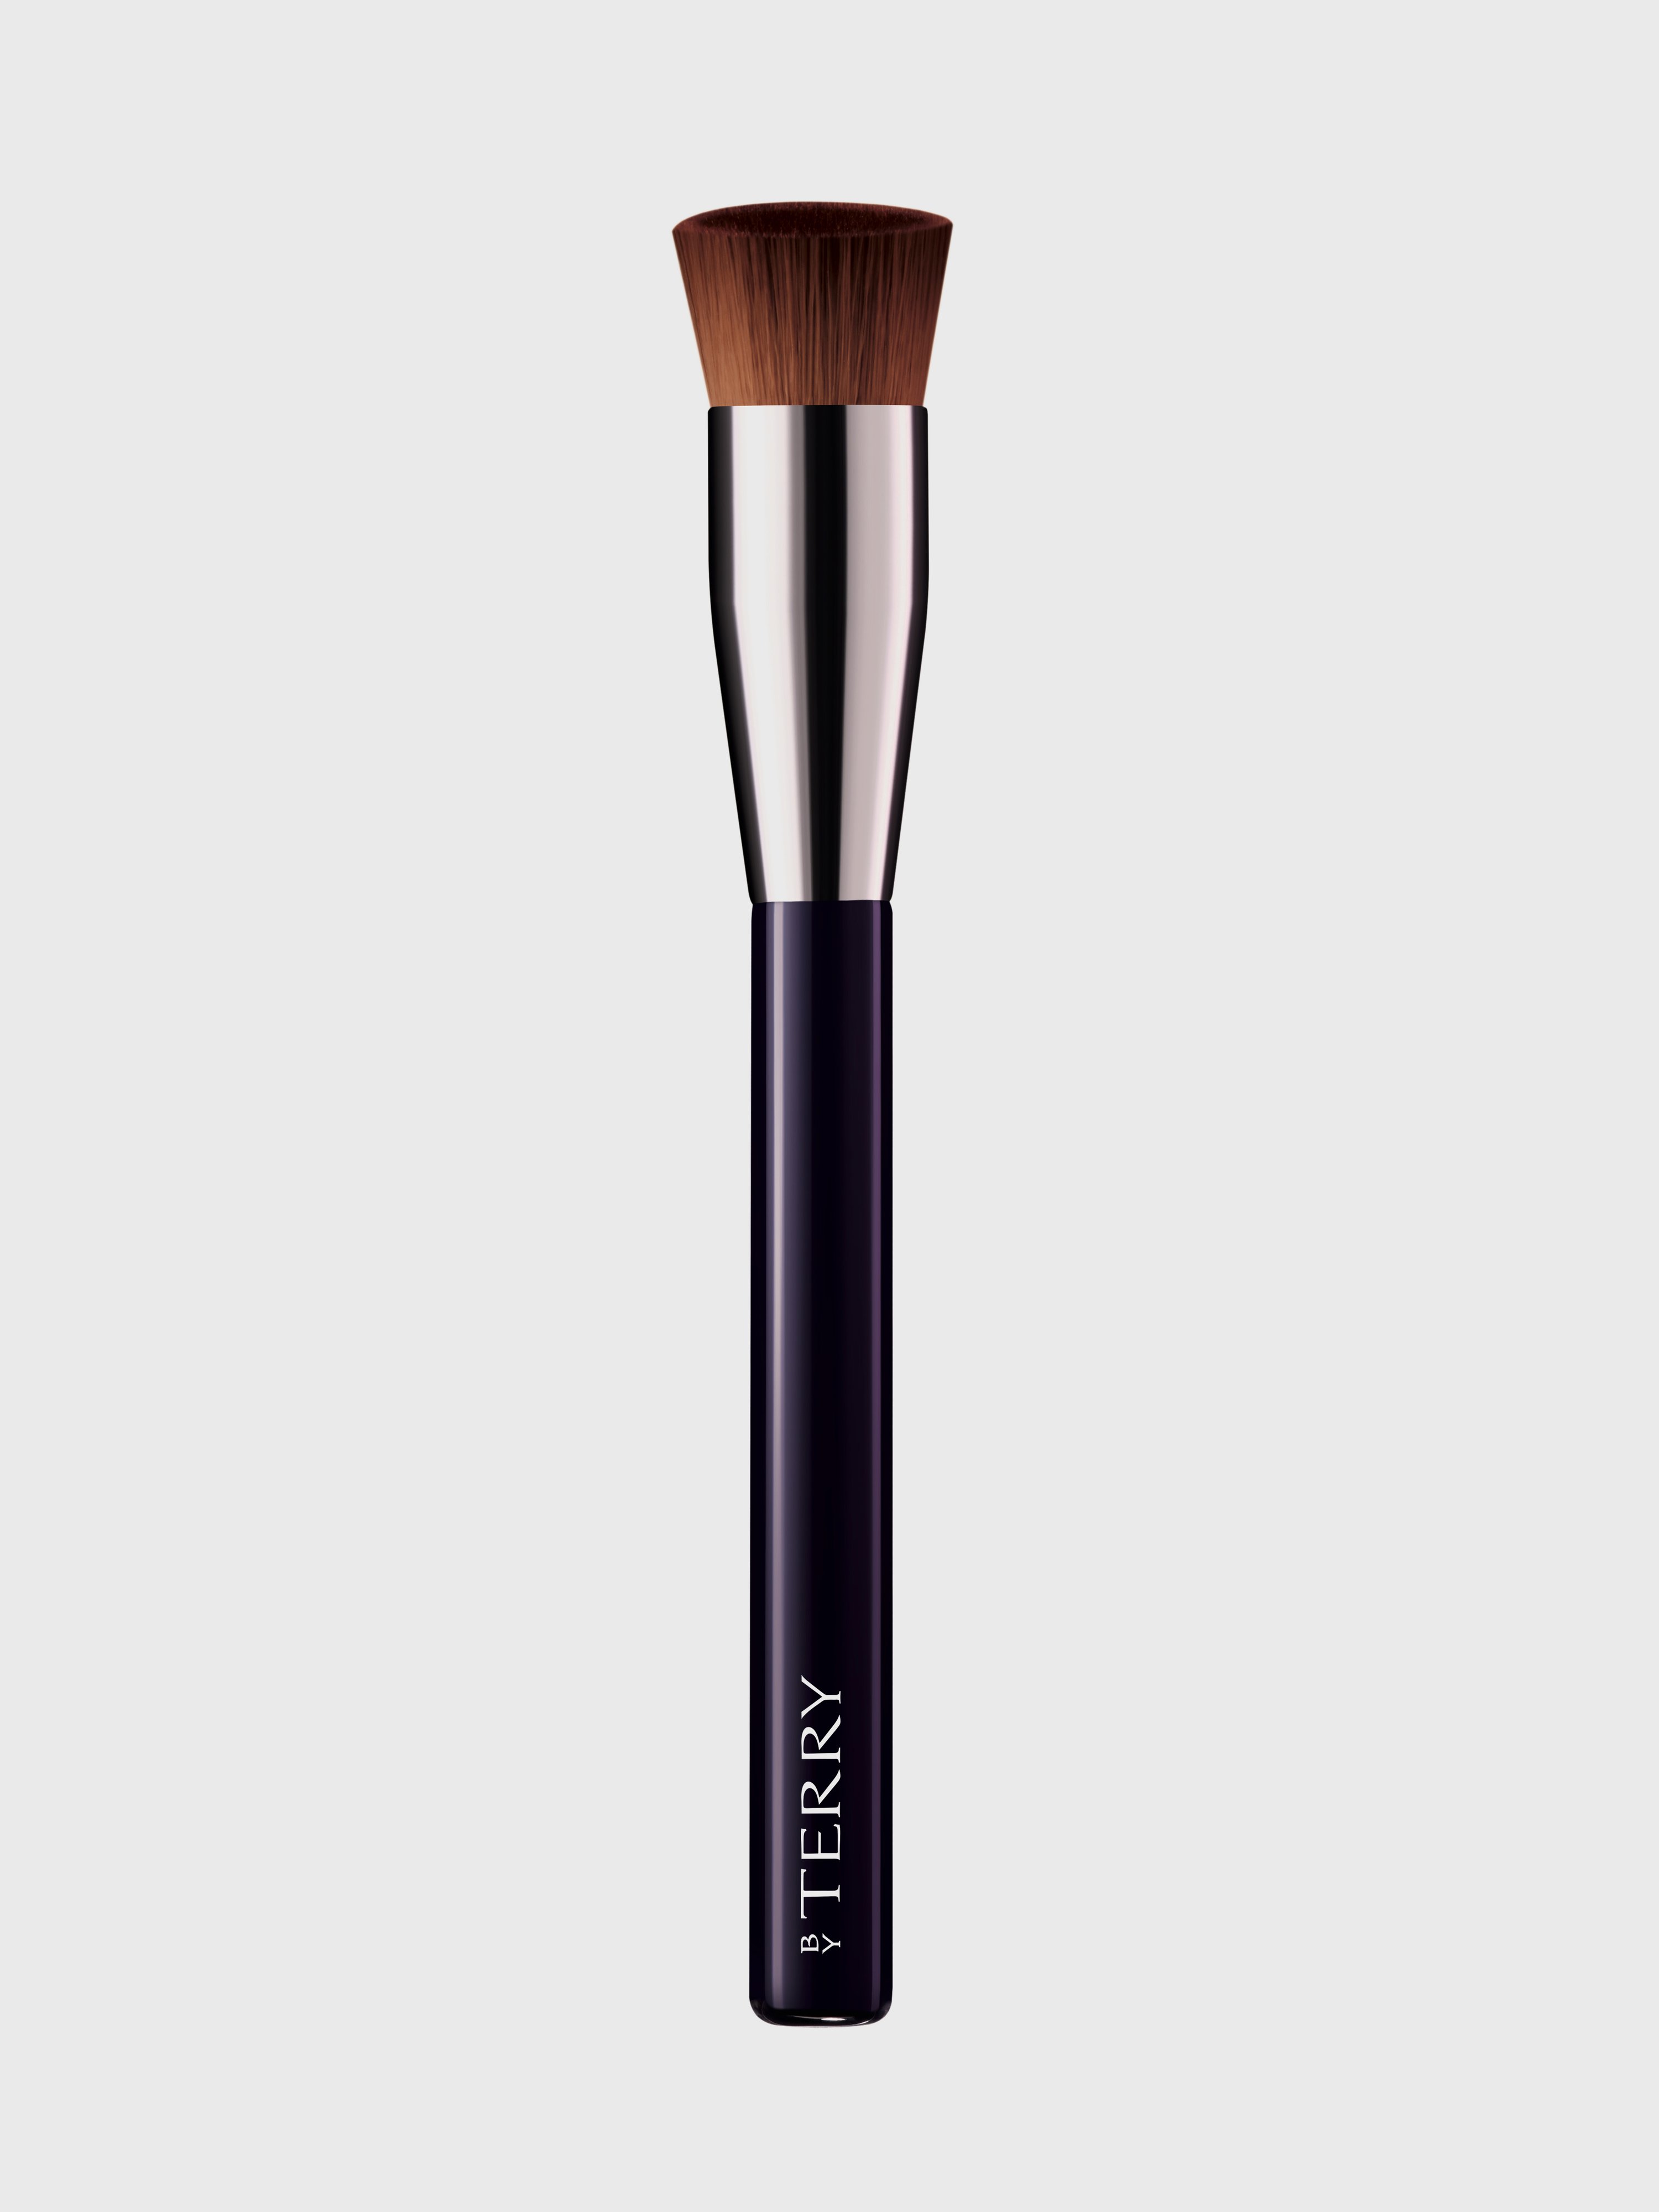 BY TERRY BY TERRY STENCIL FOUNDATION BRUSH